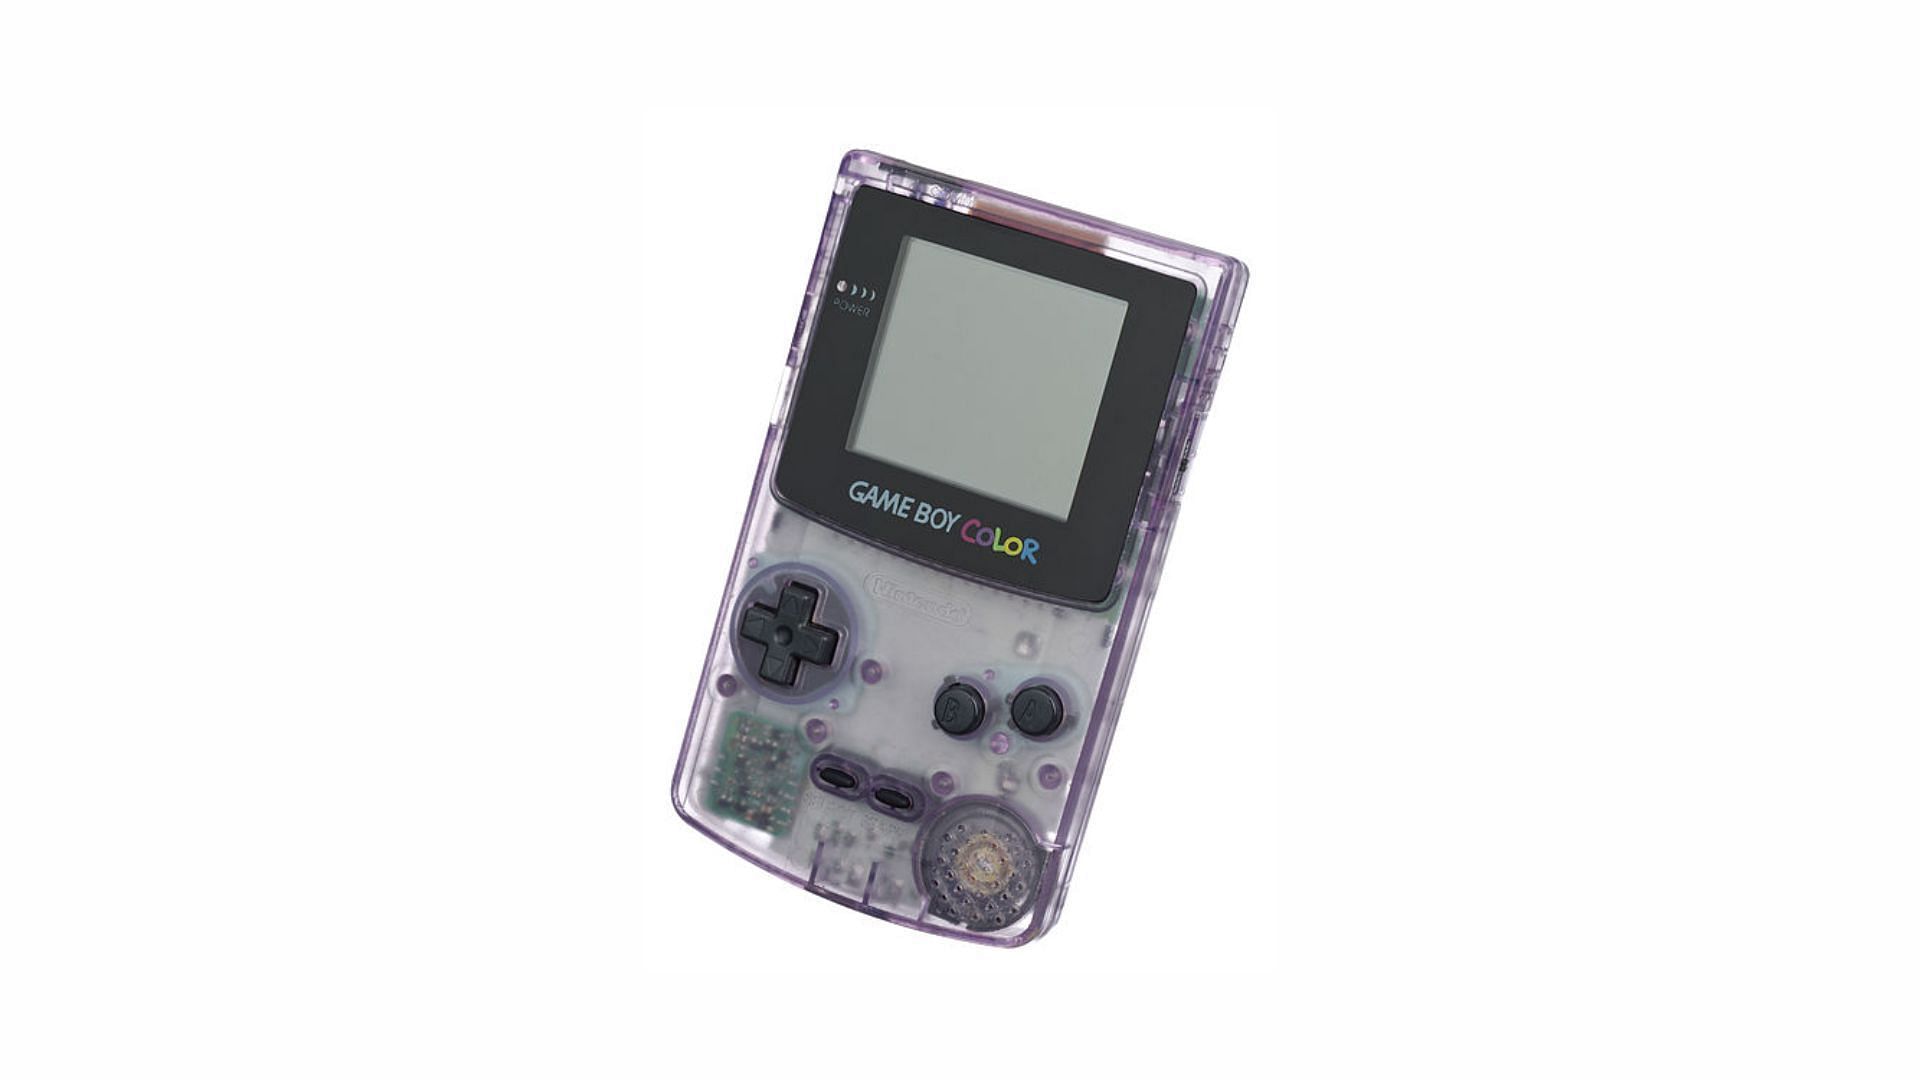 The GBC is a significant piece of gaming history and a must-have for anyone into rare Nintendo consoles. (Image via Wikipedia)